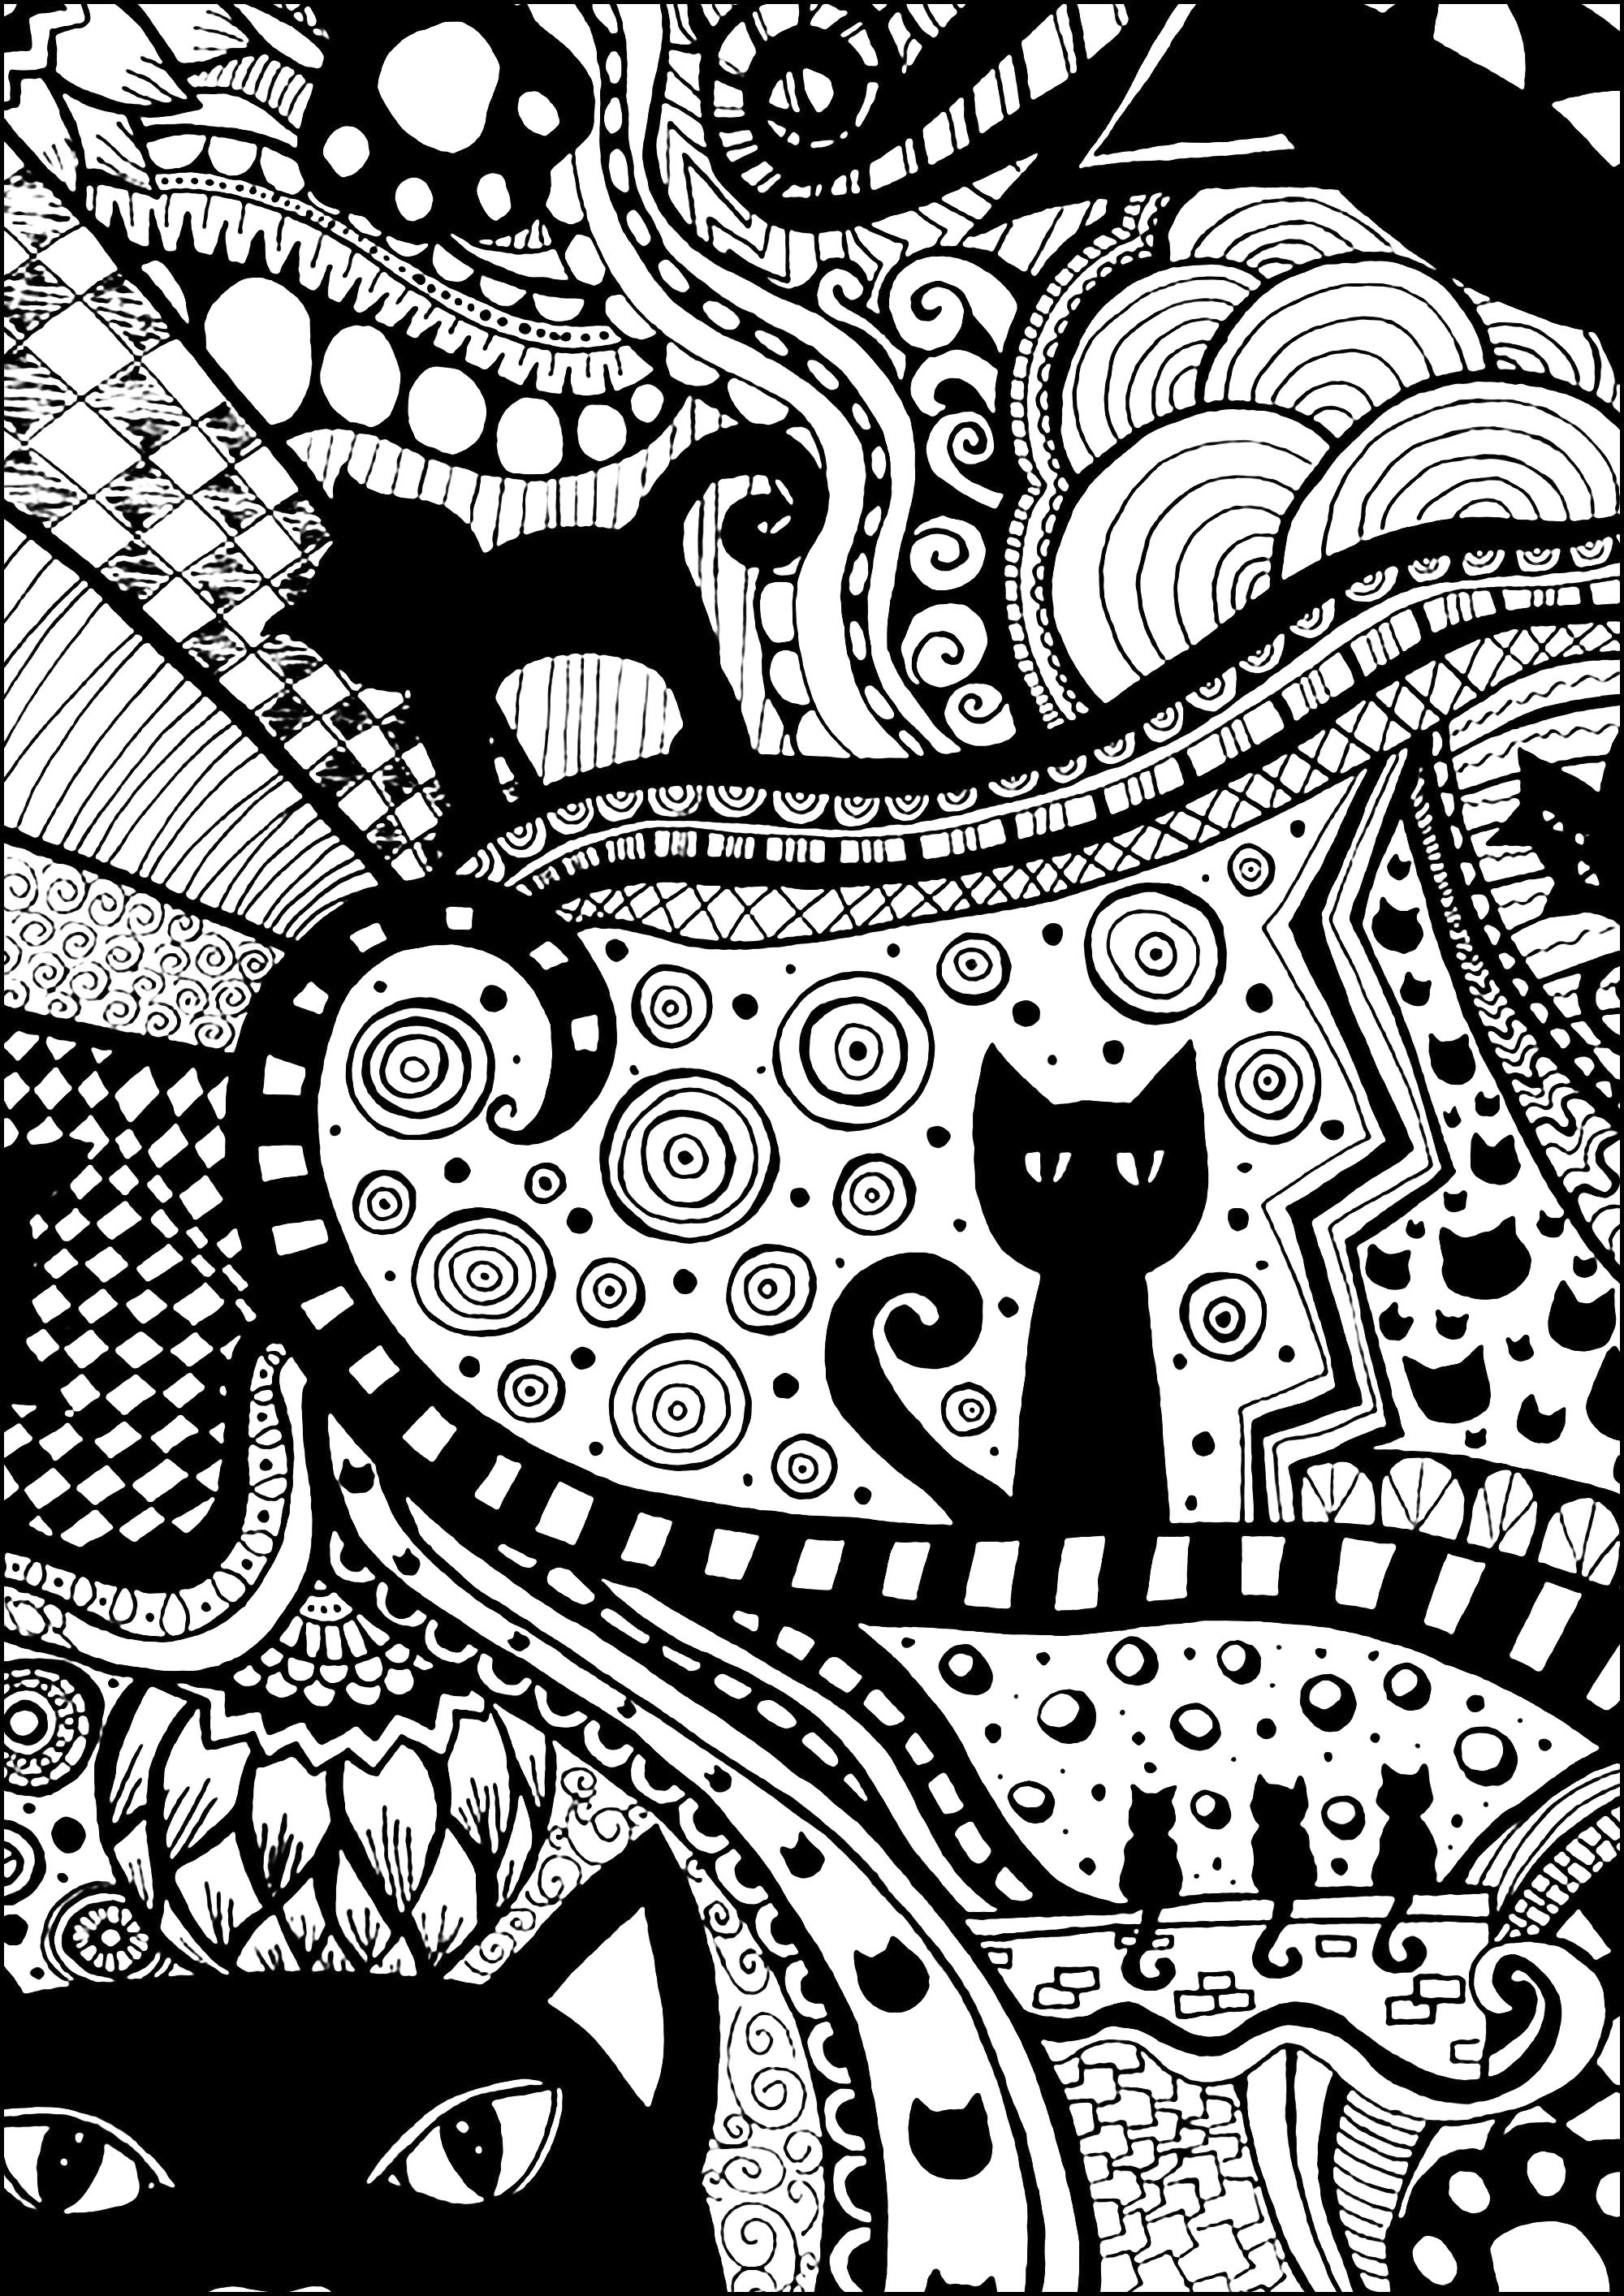 Black cats. A dark and bewitching coloring